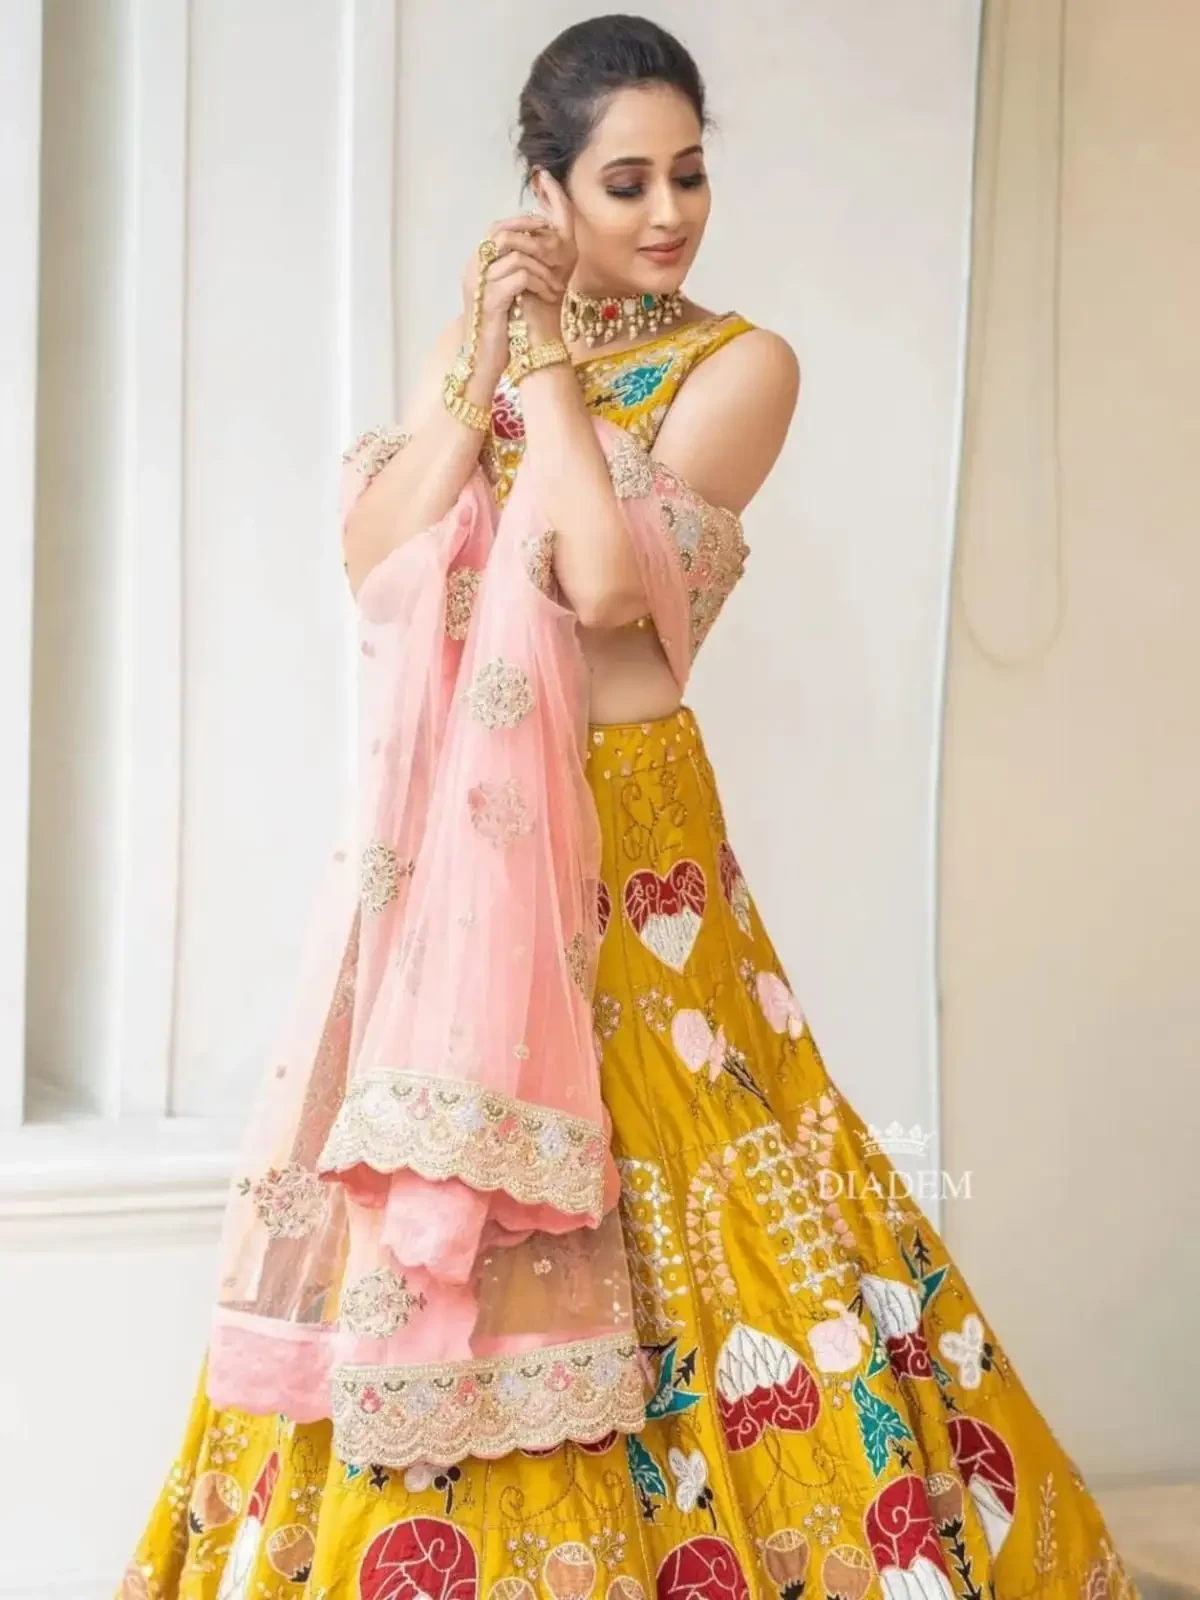 Chrome Yellow Lehenga Embellished In Floral Threads And Gota Patti With Zari Embroidery Dupatta